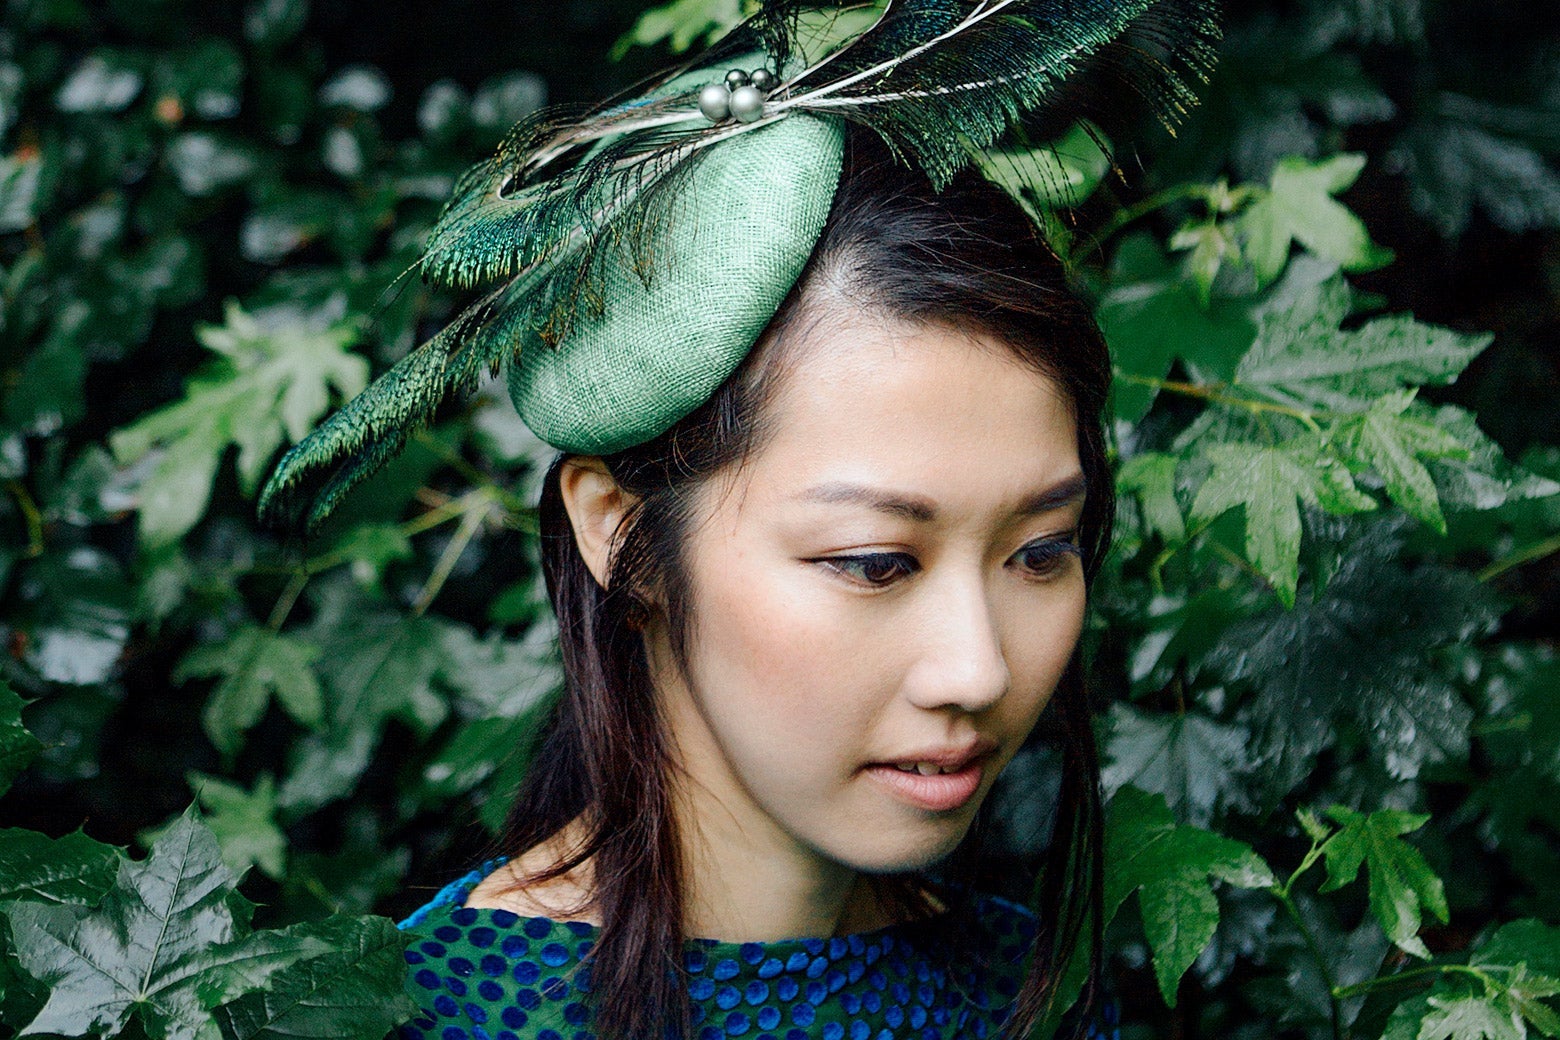 Miho Hazama against a backdrop of green leaves.